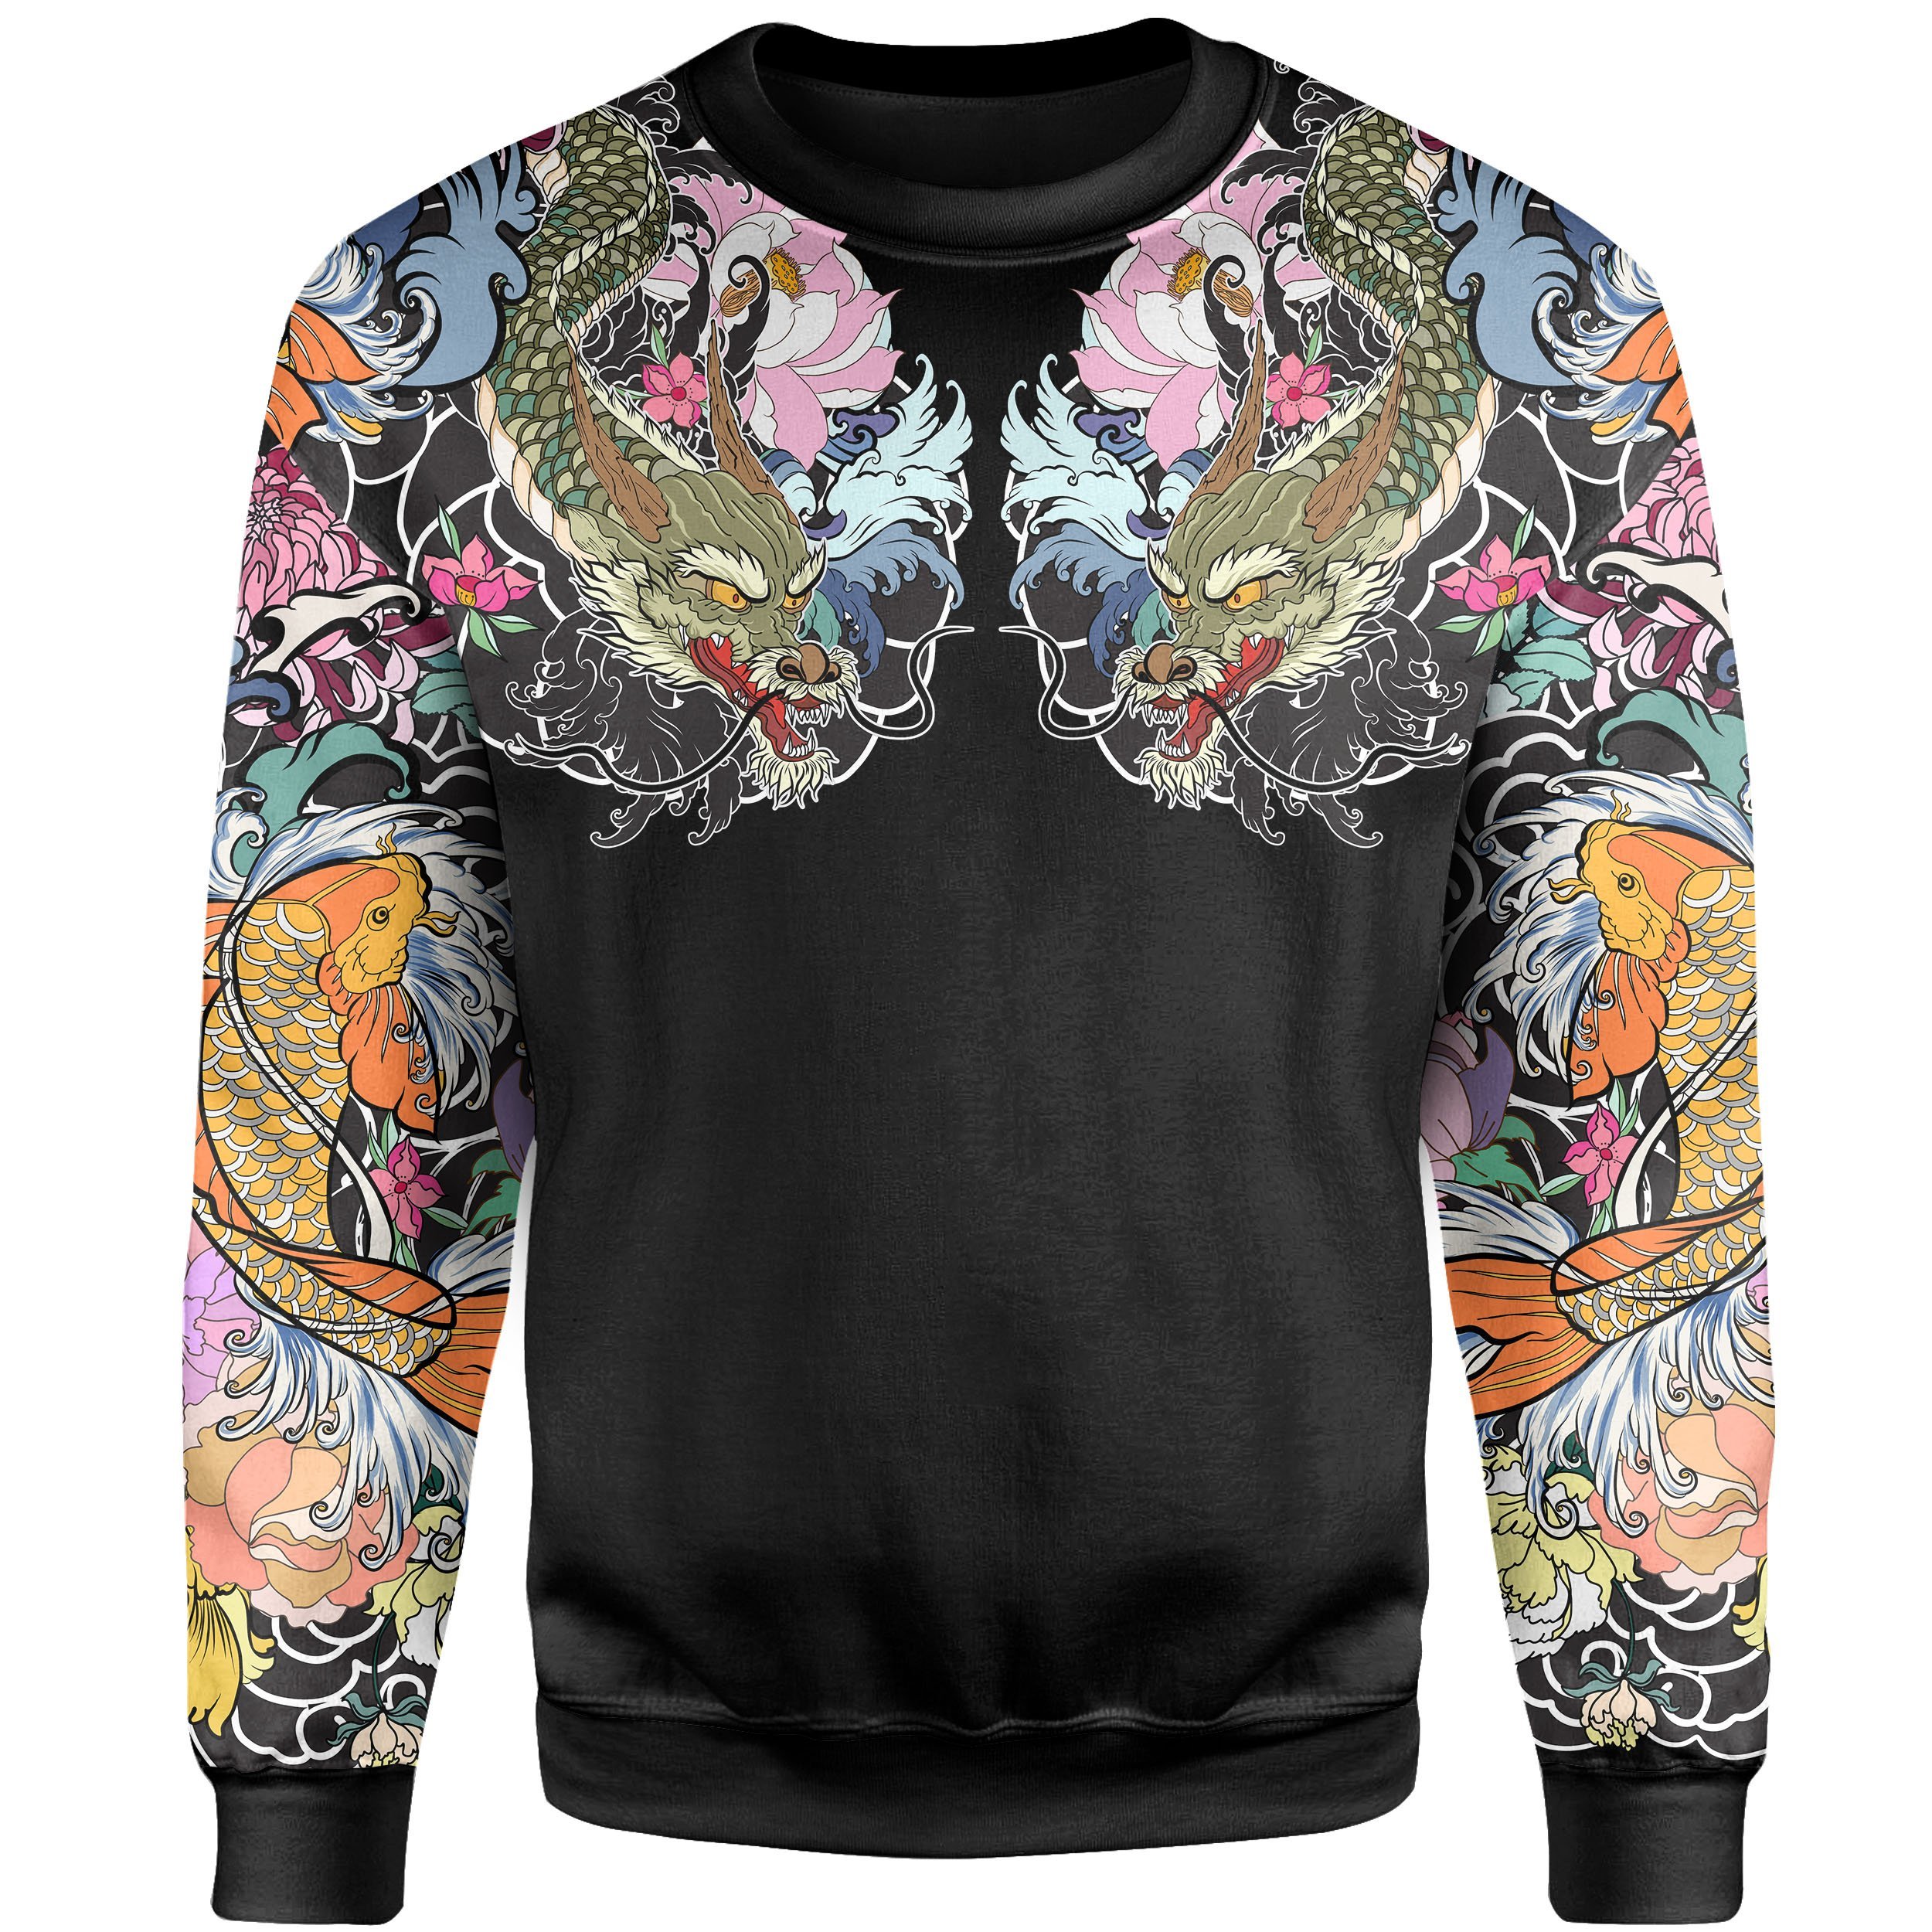 Koi Fish And Dragon Tattoo Style Sweatshirt (Knitted Long Sleeved Sweater) 